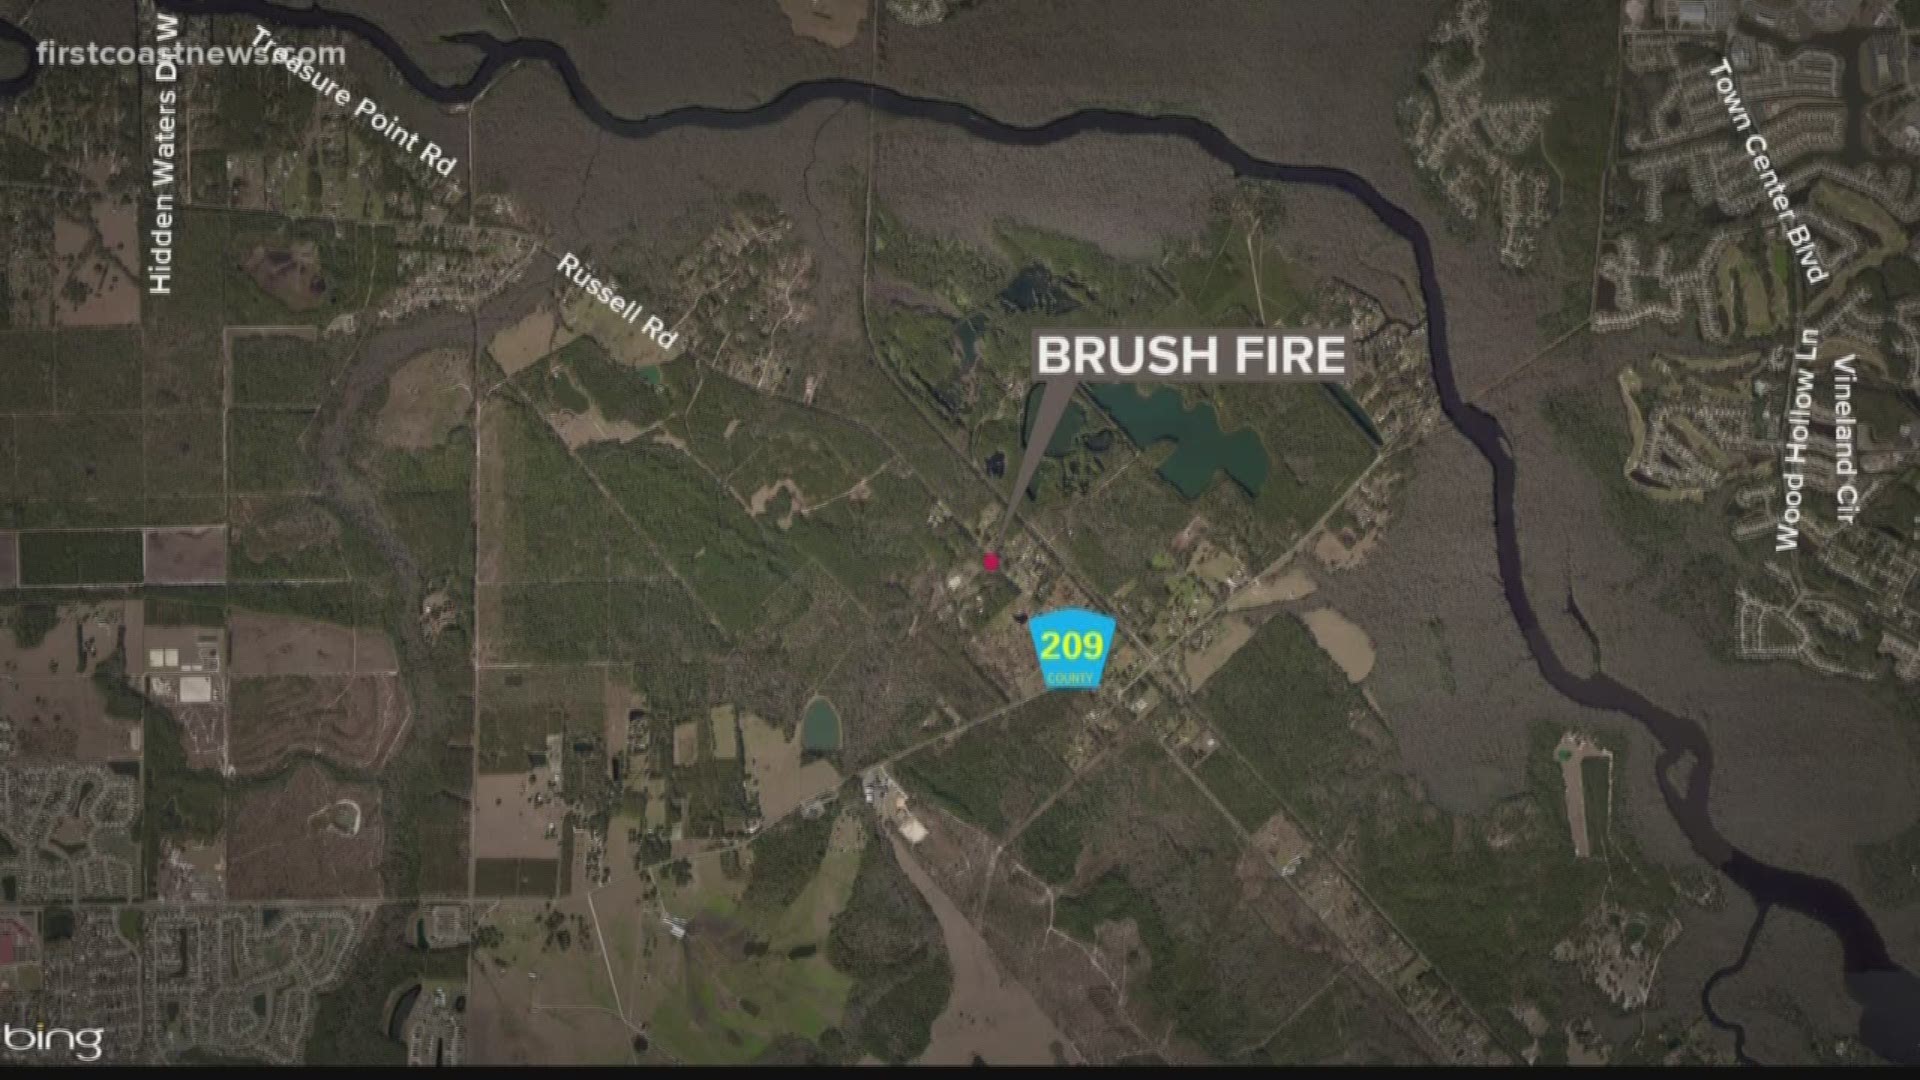 Firefighters and crews with the Florida Forest Service contained a 1-acre forest fire in Nocatee Sunday night.